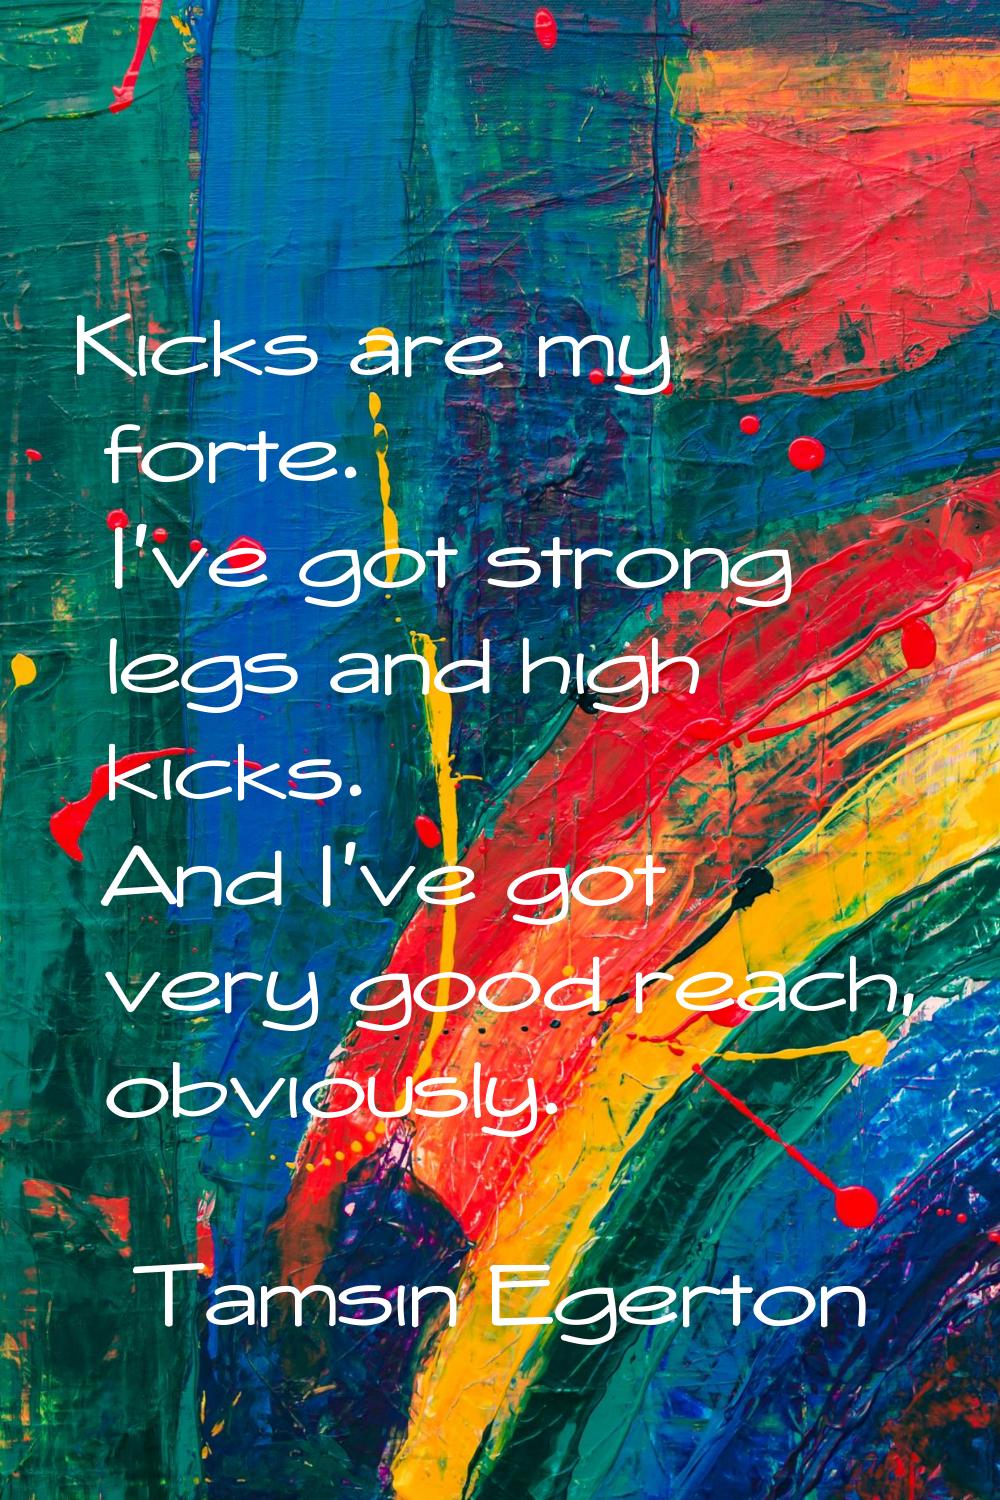 Kicks are my forte. I've got strong legs and high kicks. And I've got very good reach, obviously.